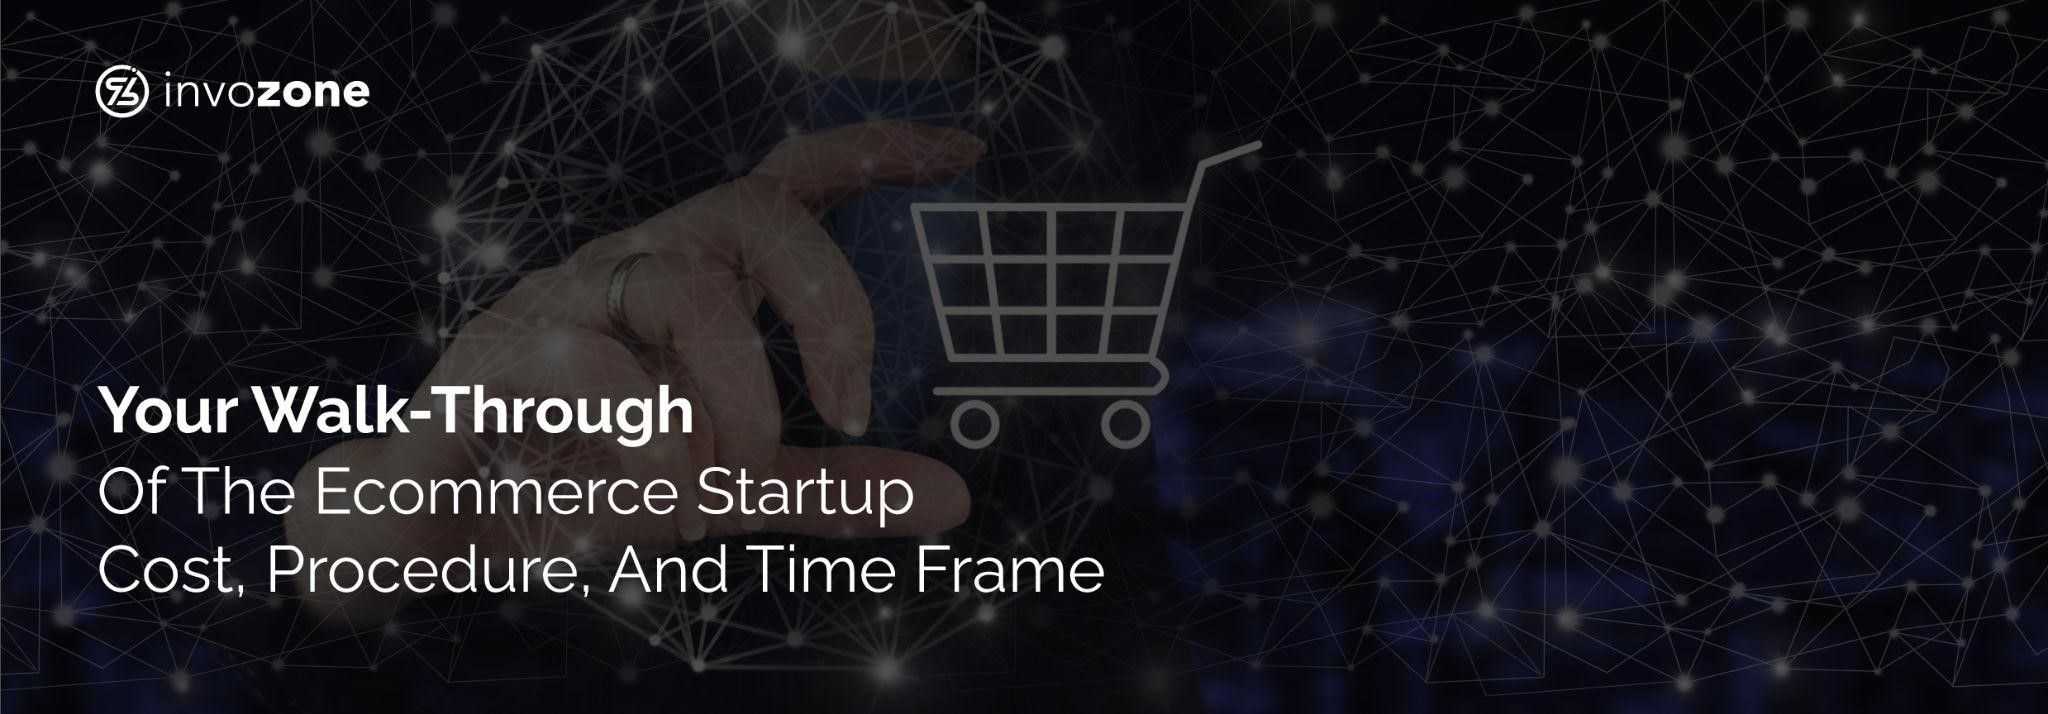 Walk-Through of The Ecommerce Startup Cost, Procedure, And Time Frame